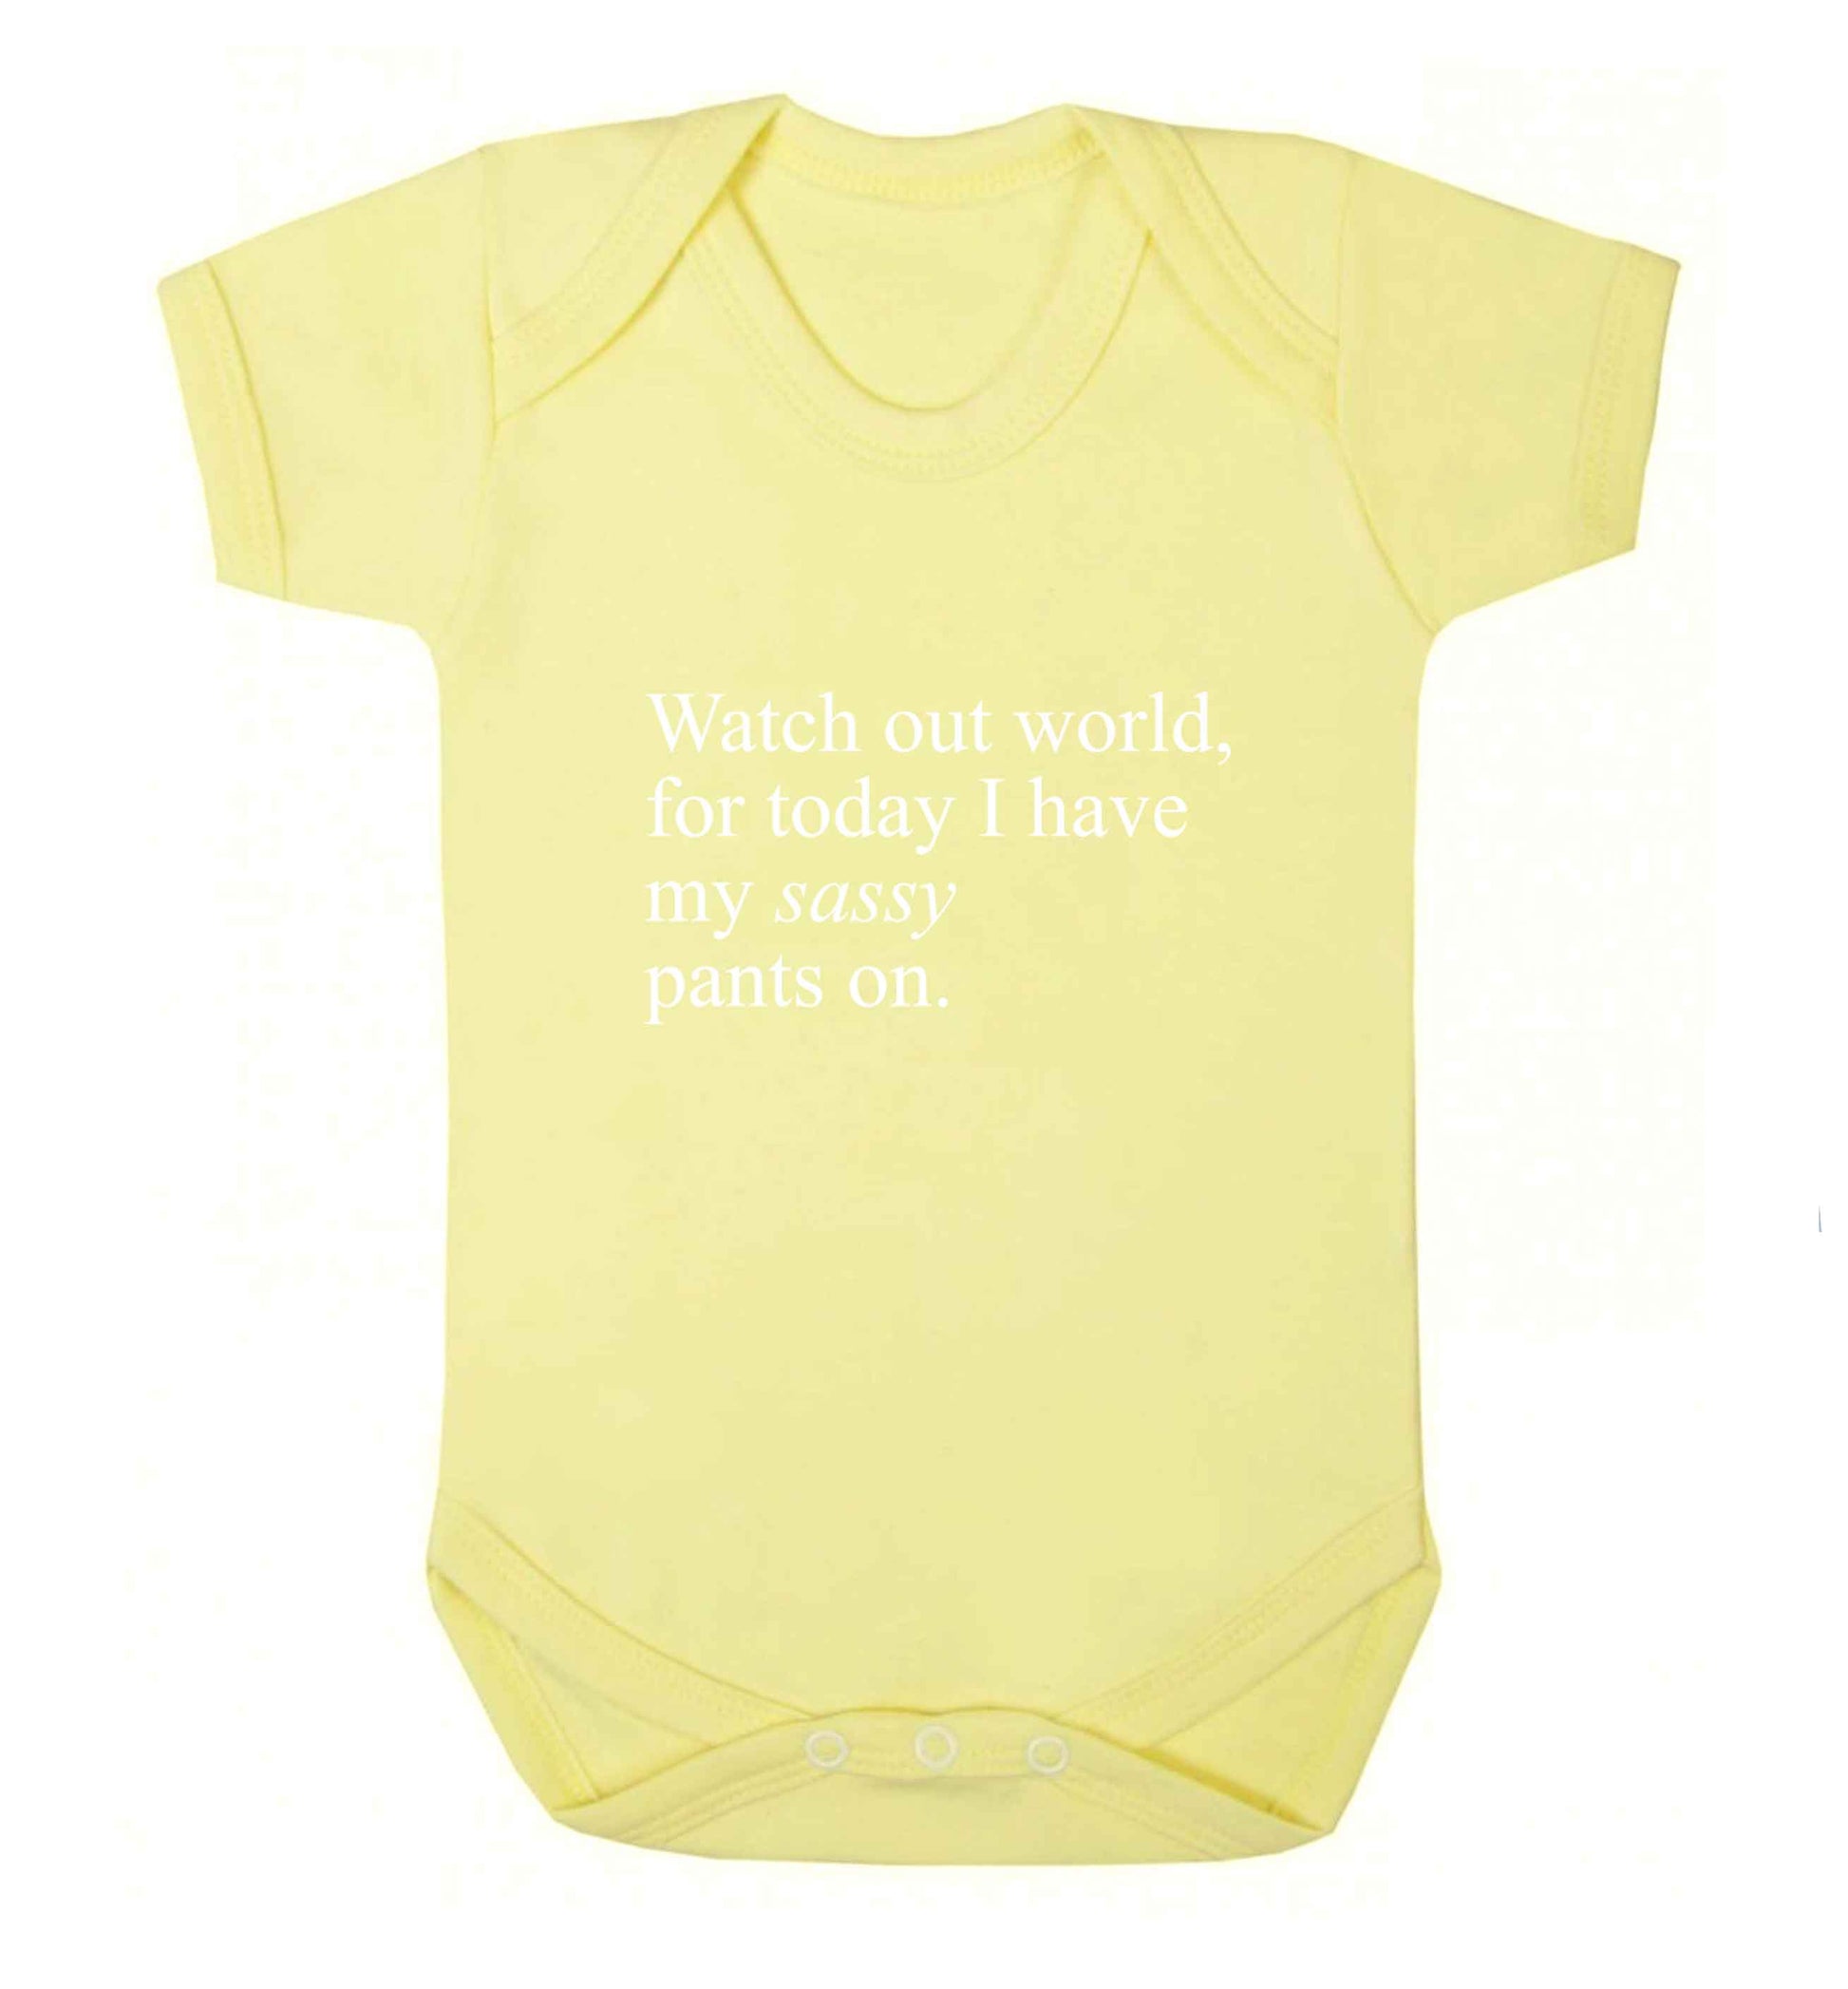 Watch out world for today I have my sassy pants on baby vest pale yellow 18-24 months